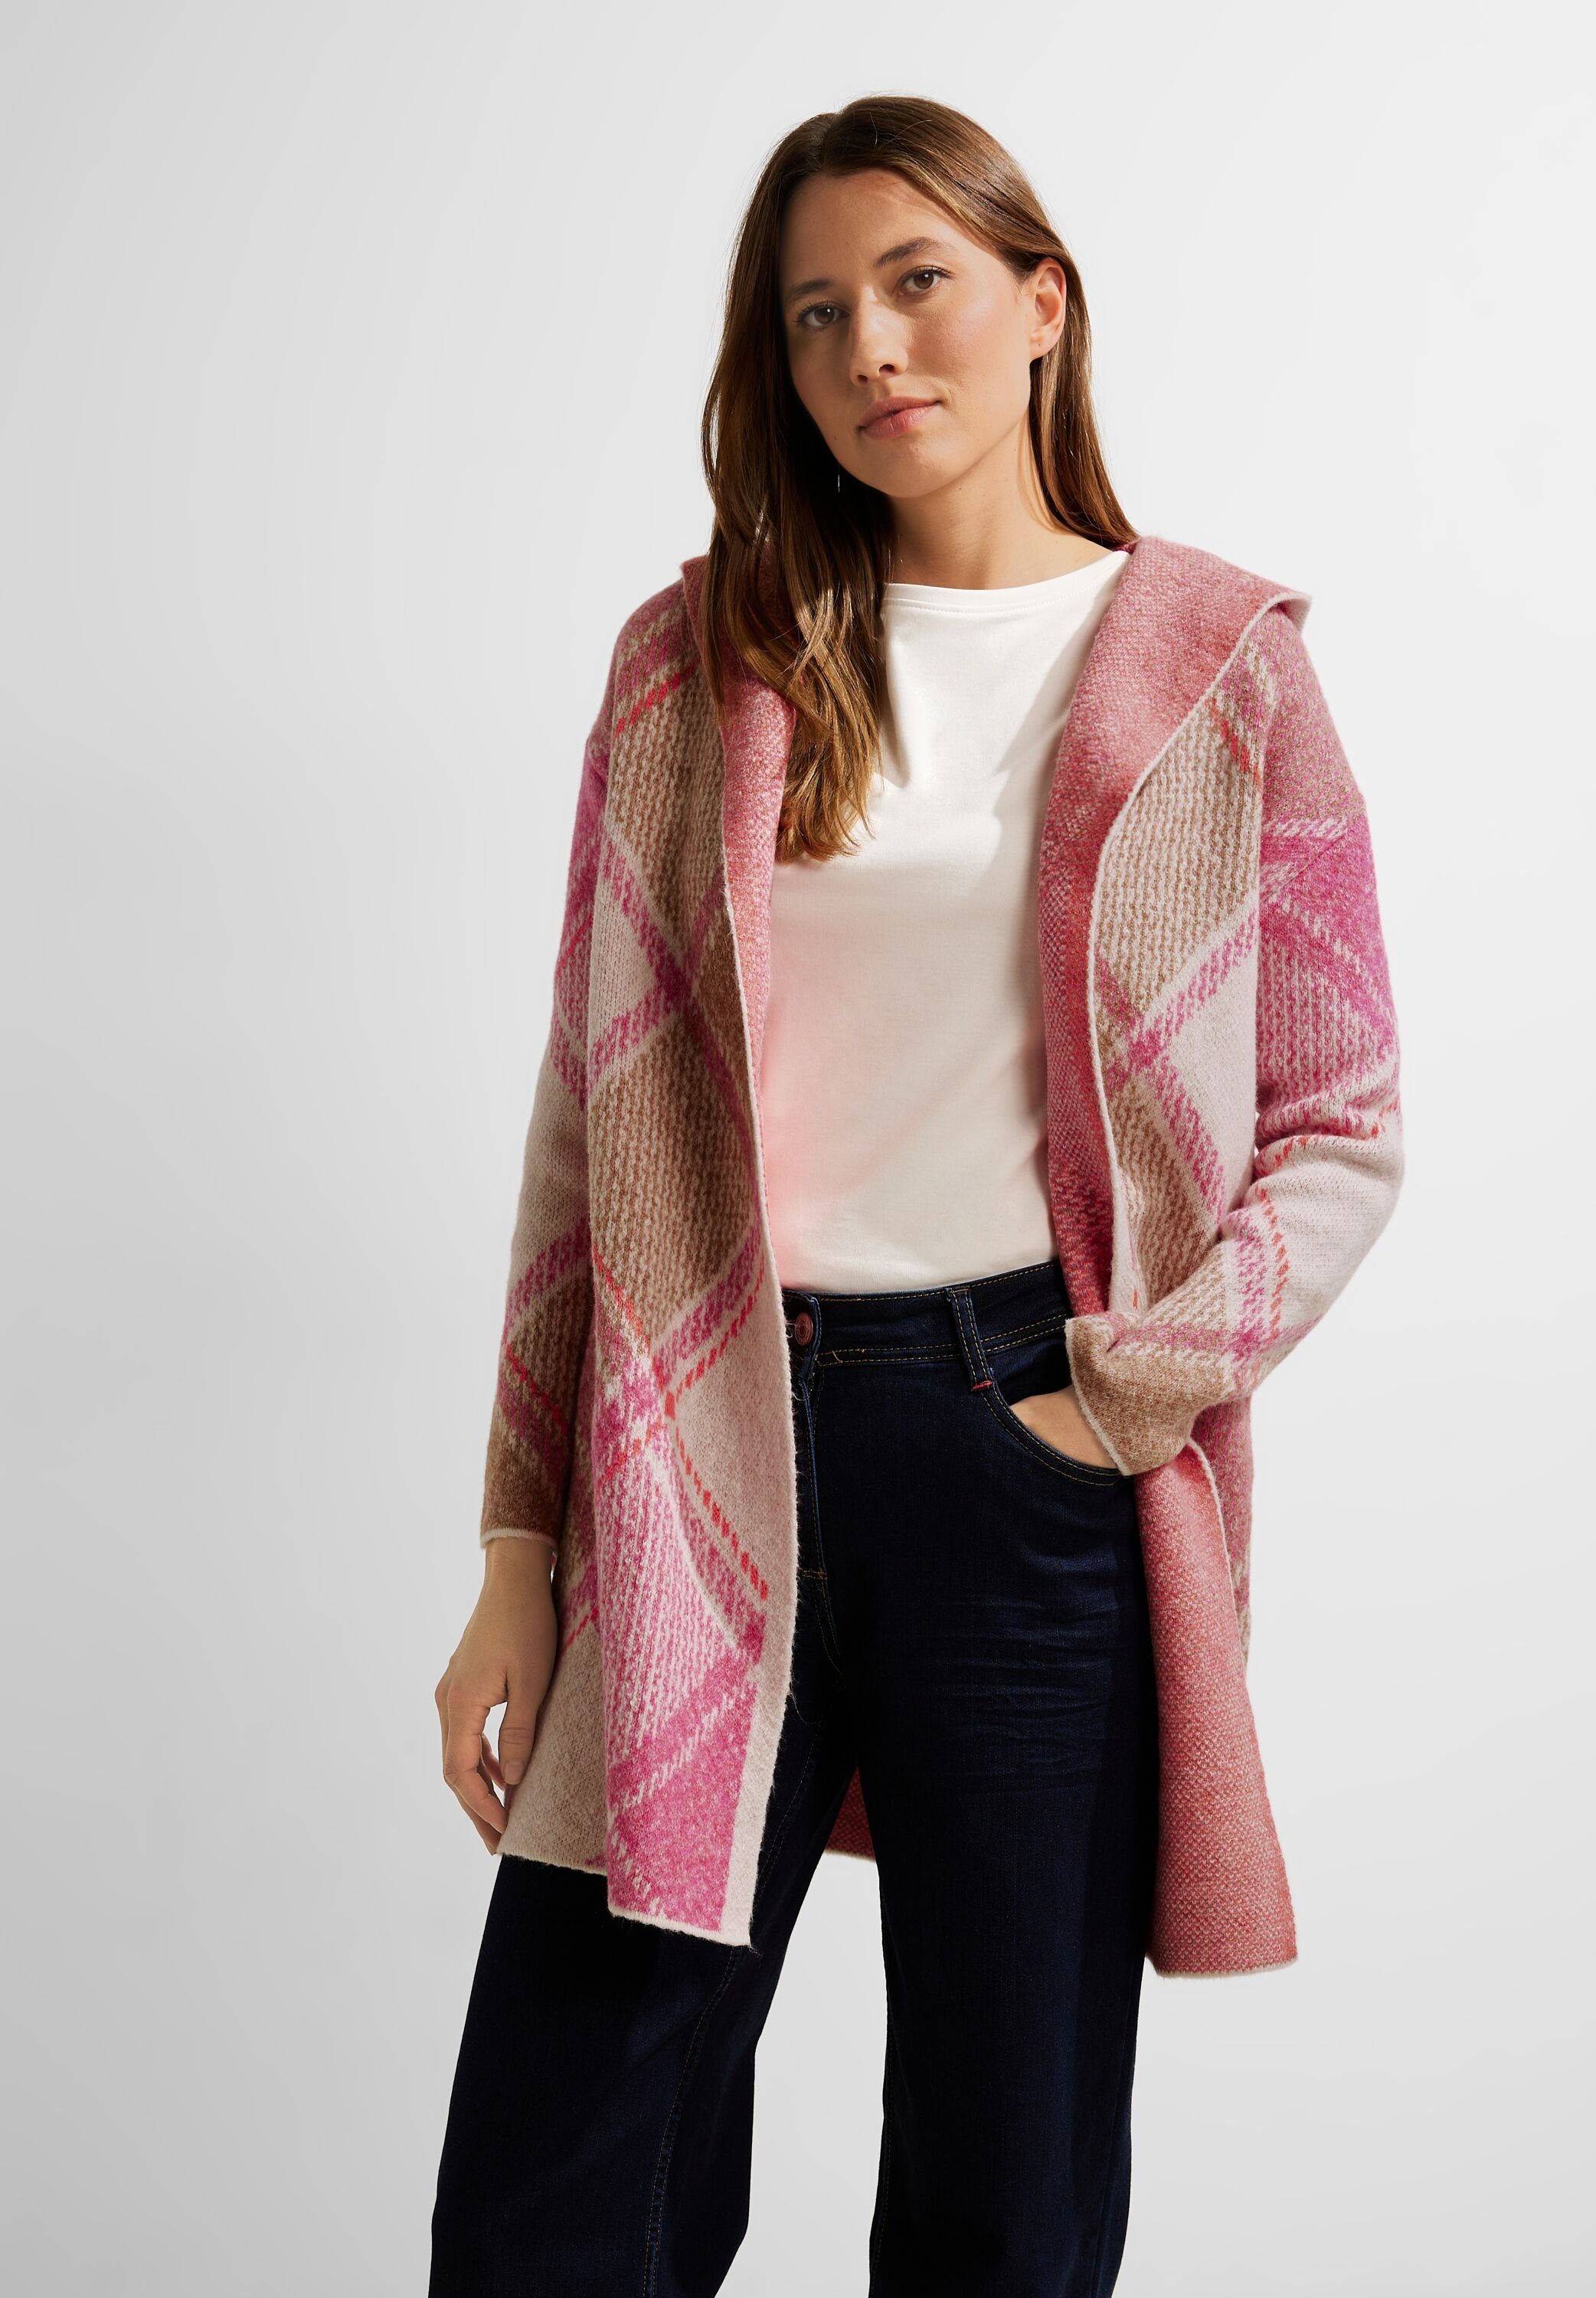 Cardigan Cecil Open Kapuzenstrickjacke cosy Cosy Jacquard-Muster Long coral Jacquard mit Form In